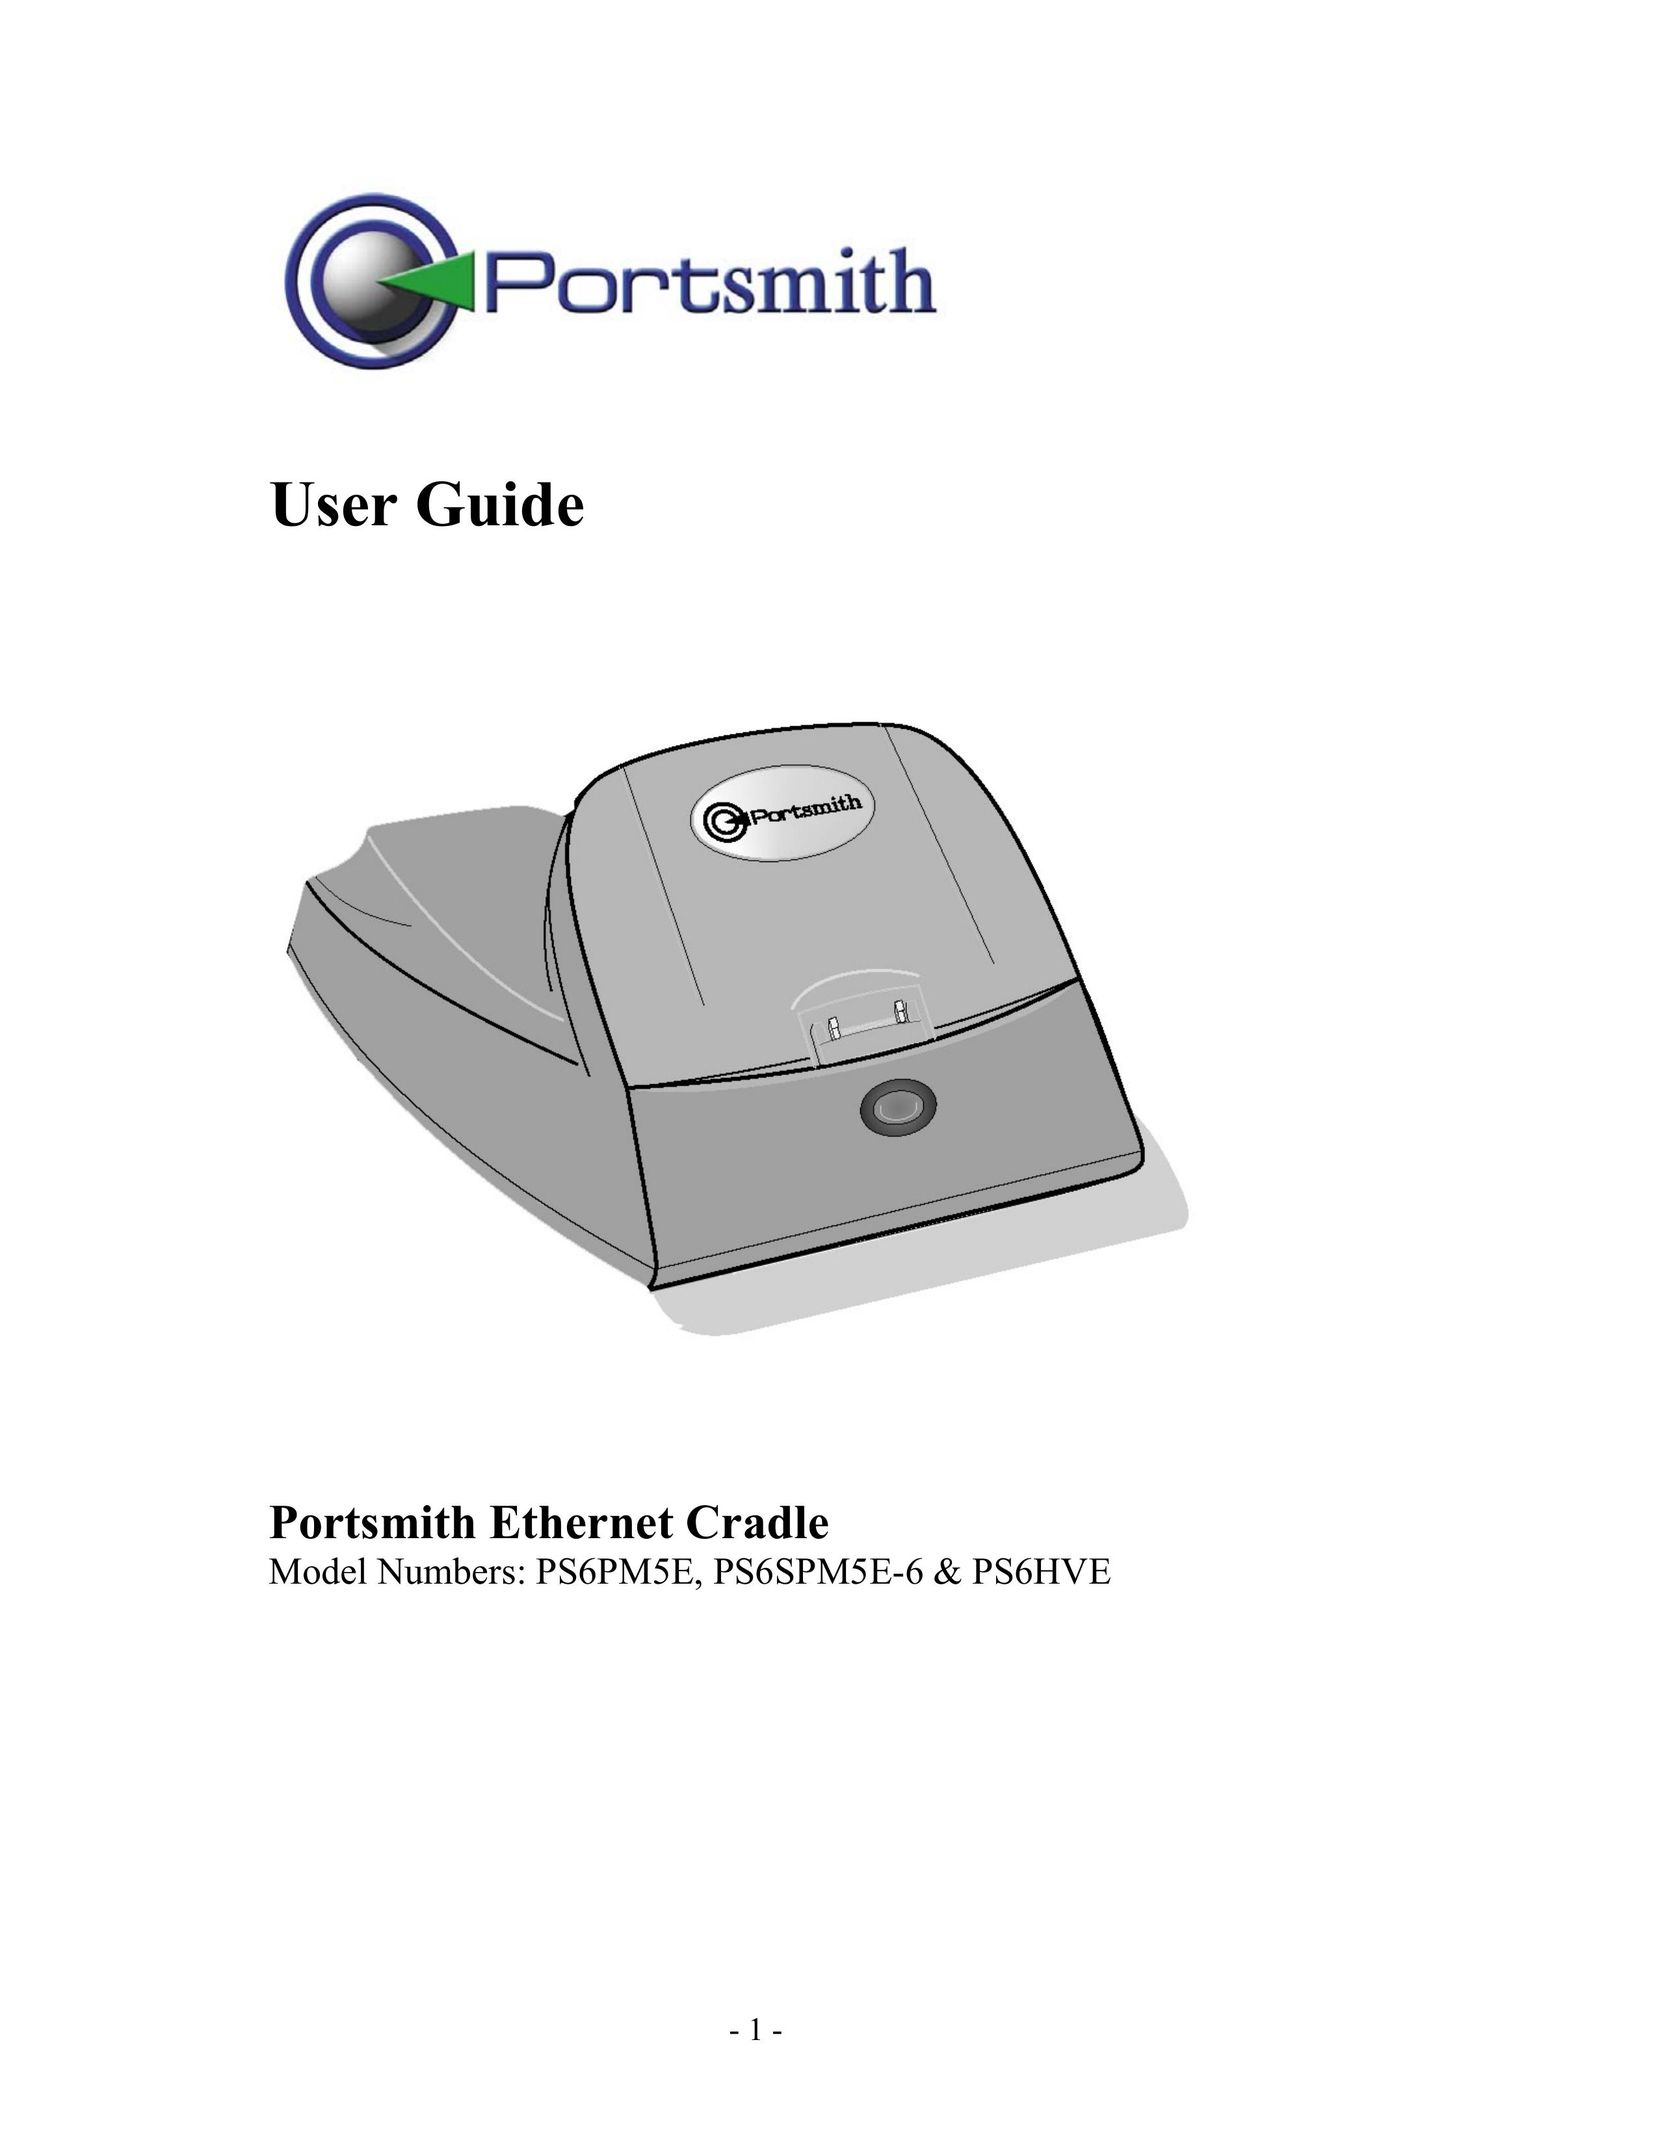 Portsmith PS6PM5E Network Card User Manual